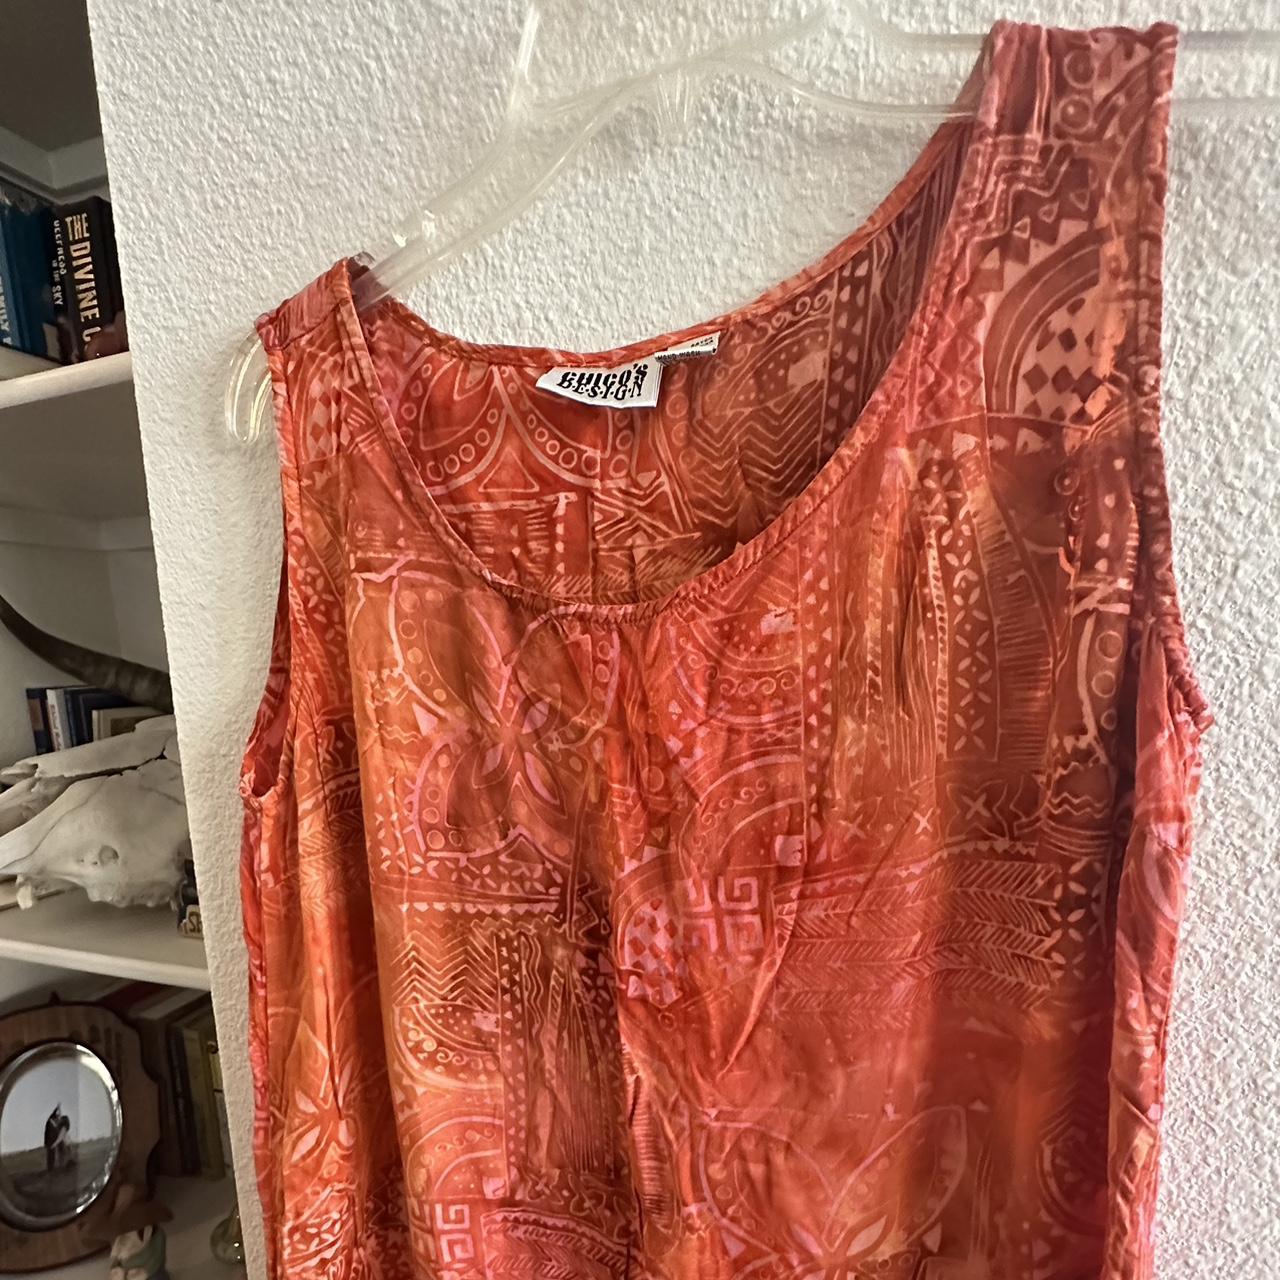 Chico's Red Sleeveless Top Chico's Size 2 RN 79984 - Depop